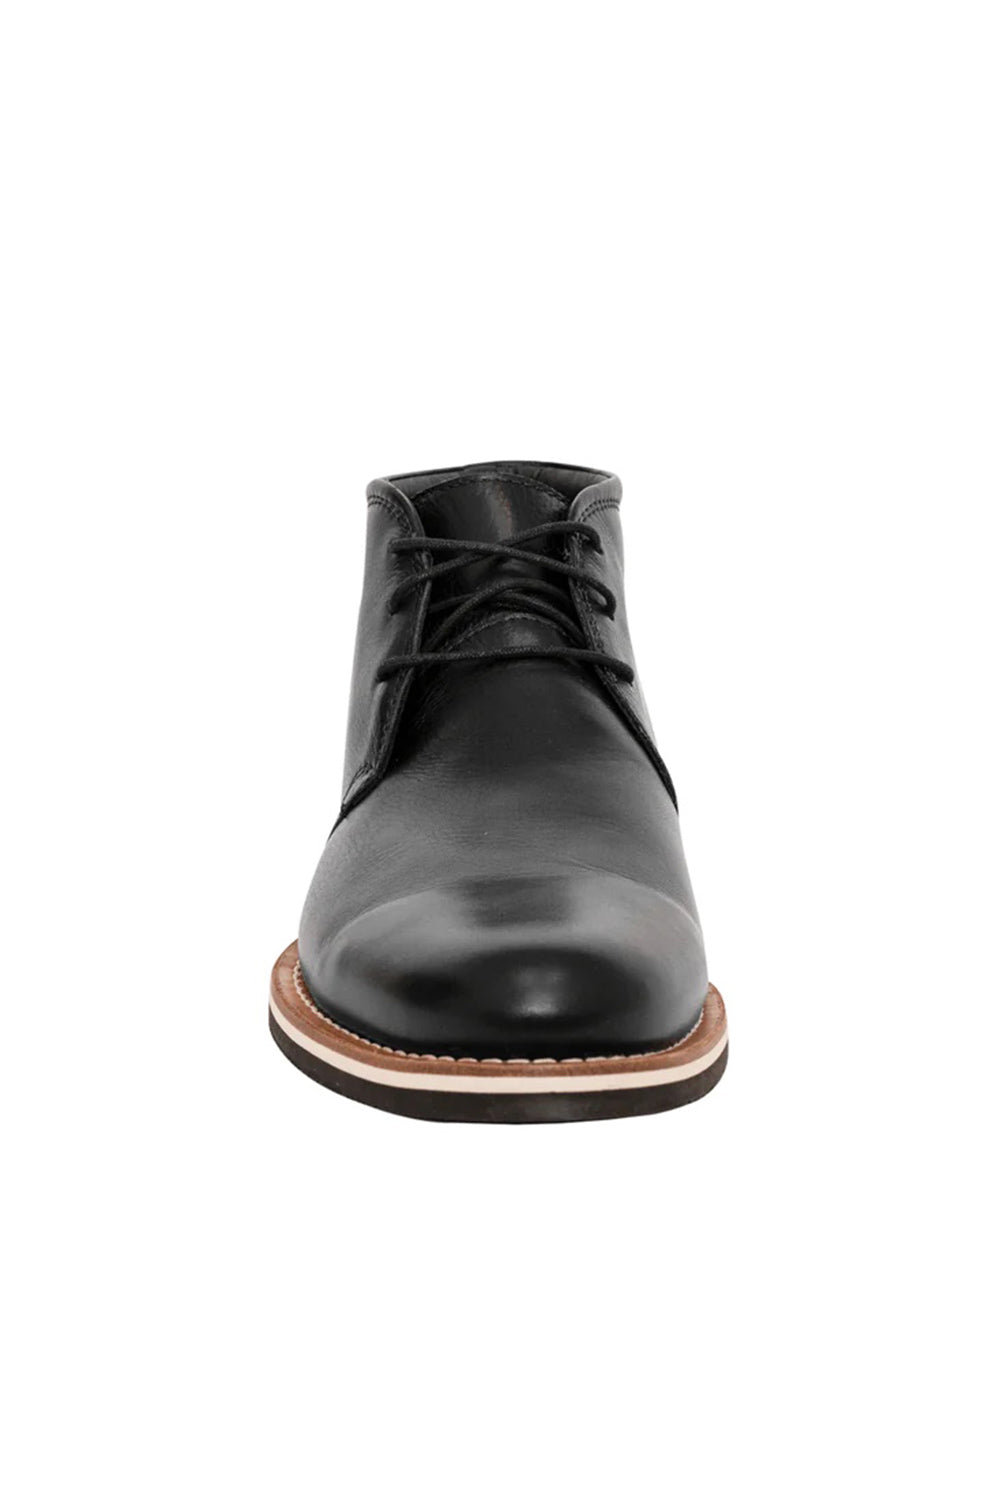 Helm Boots - The Hynes - Black - Front